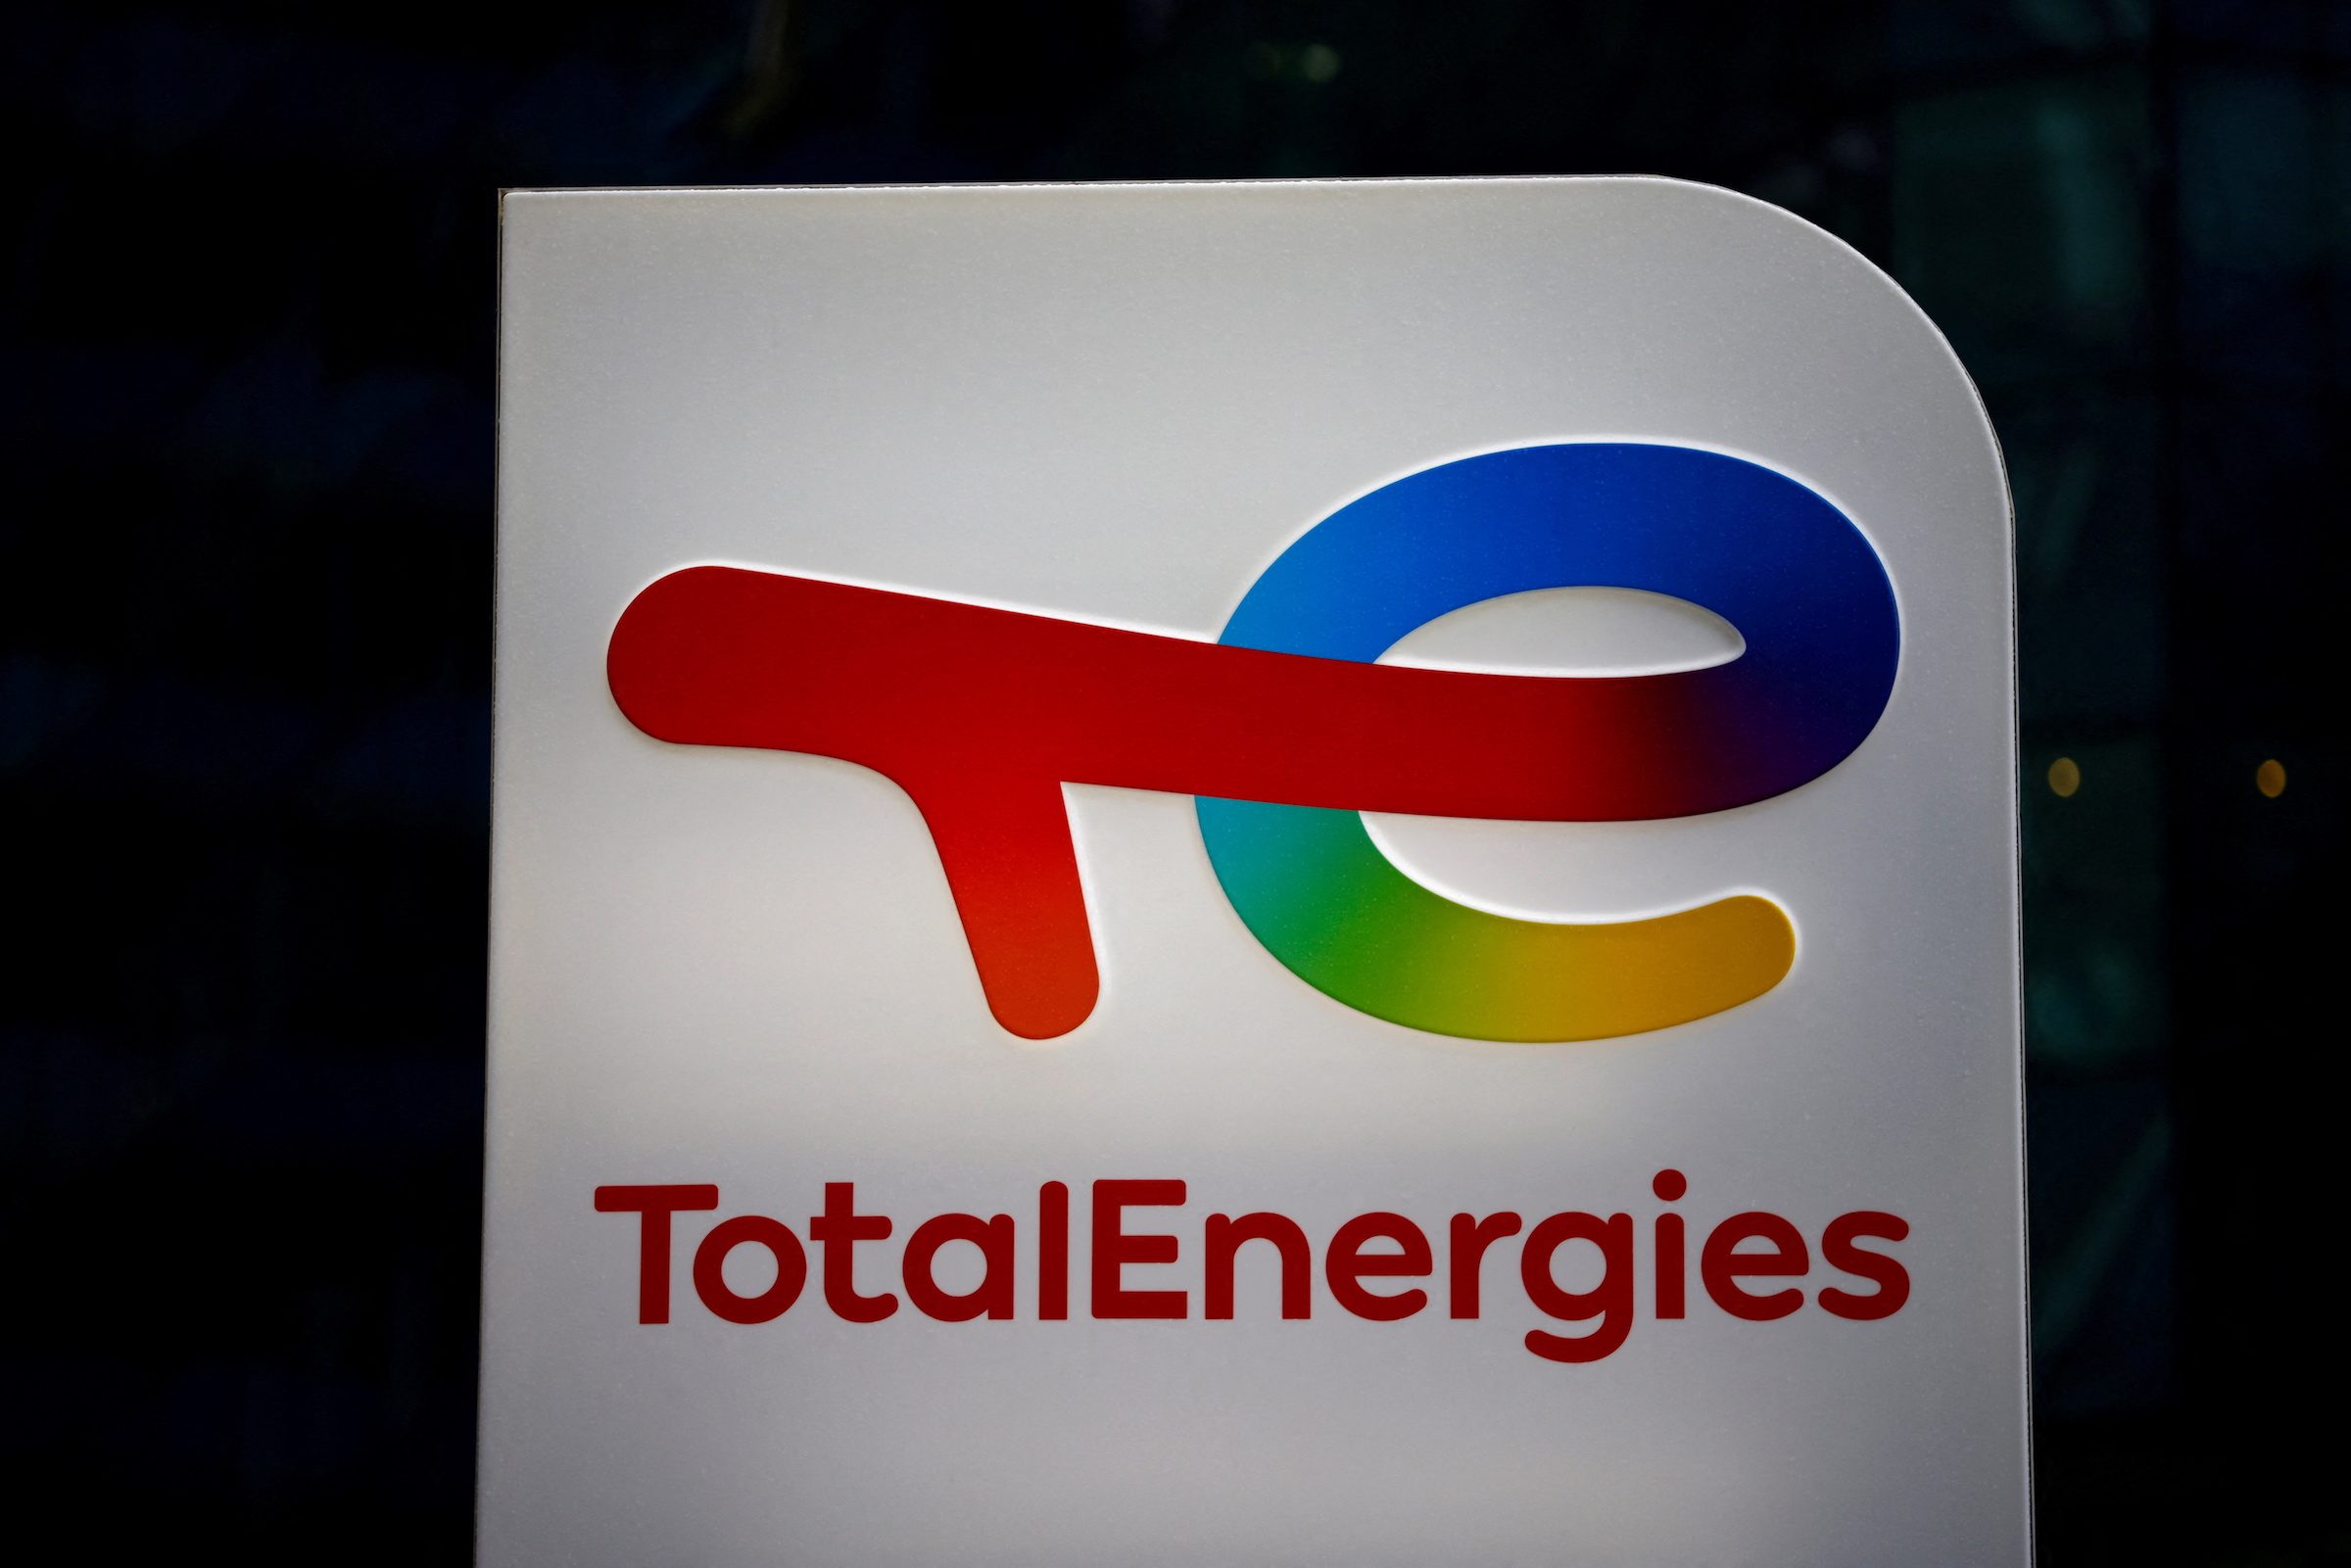 TotalEnergies stays put in Russia, but no capital for new projects